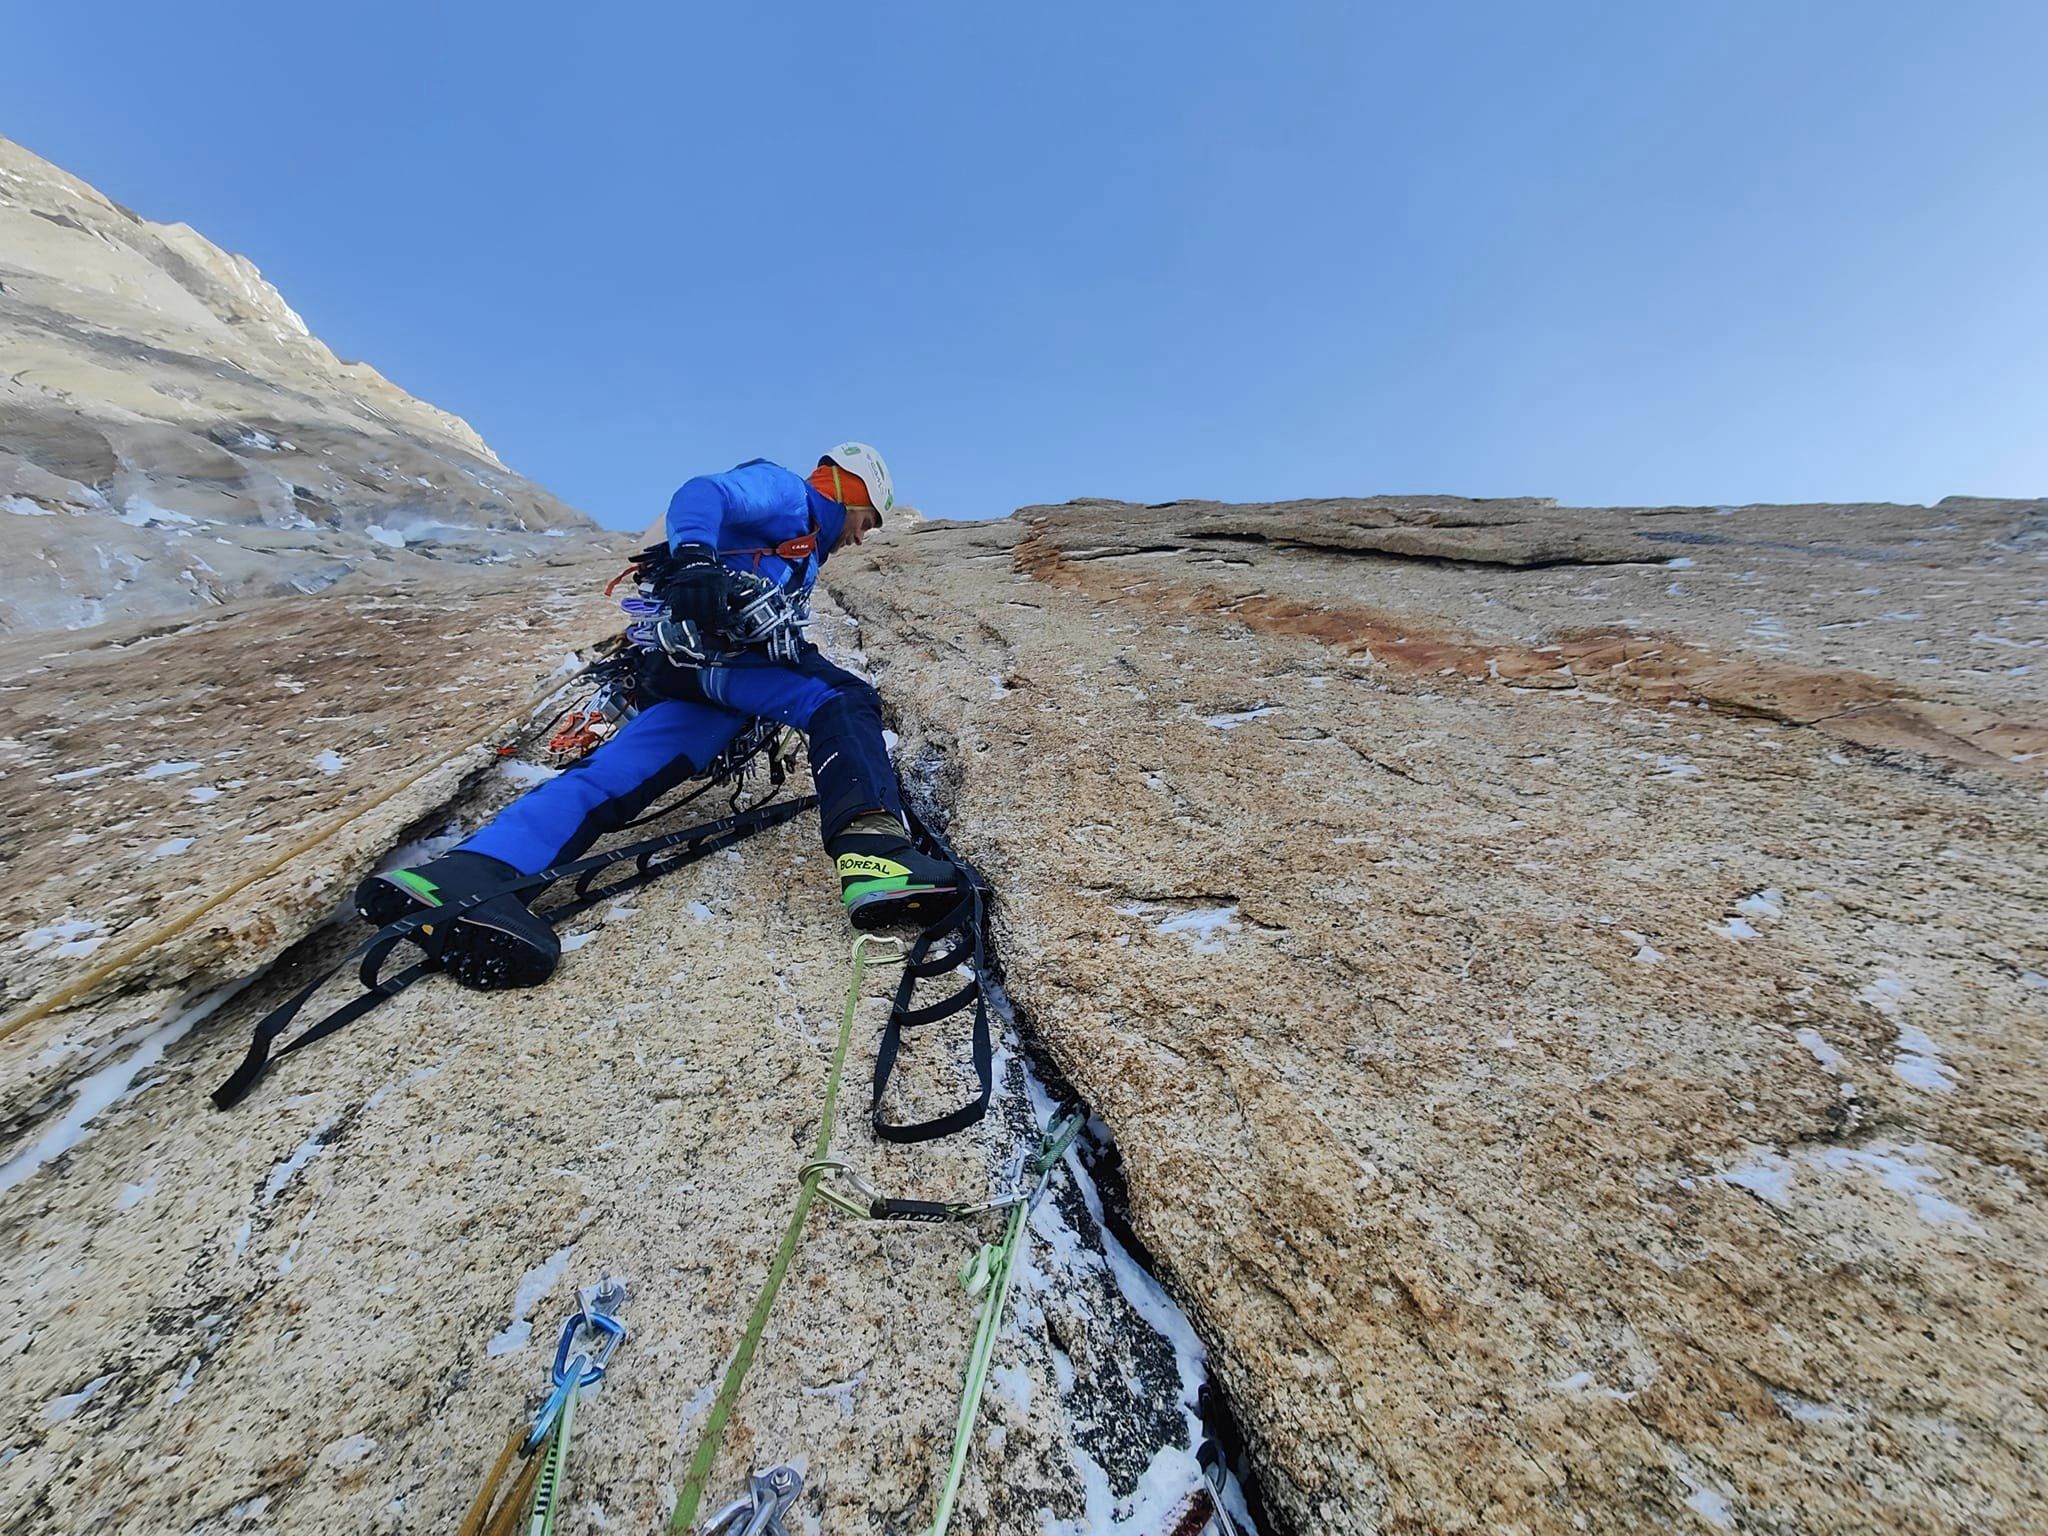 First Ascent of Last Summit in the Torres del Paine Massif » Explorersweb